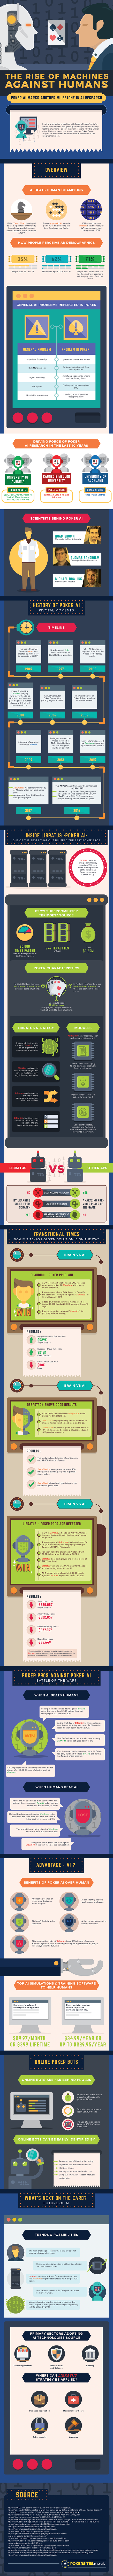 Poker and AI infographic